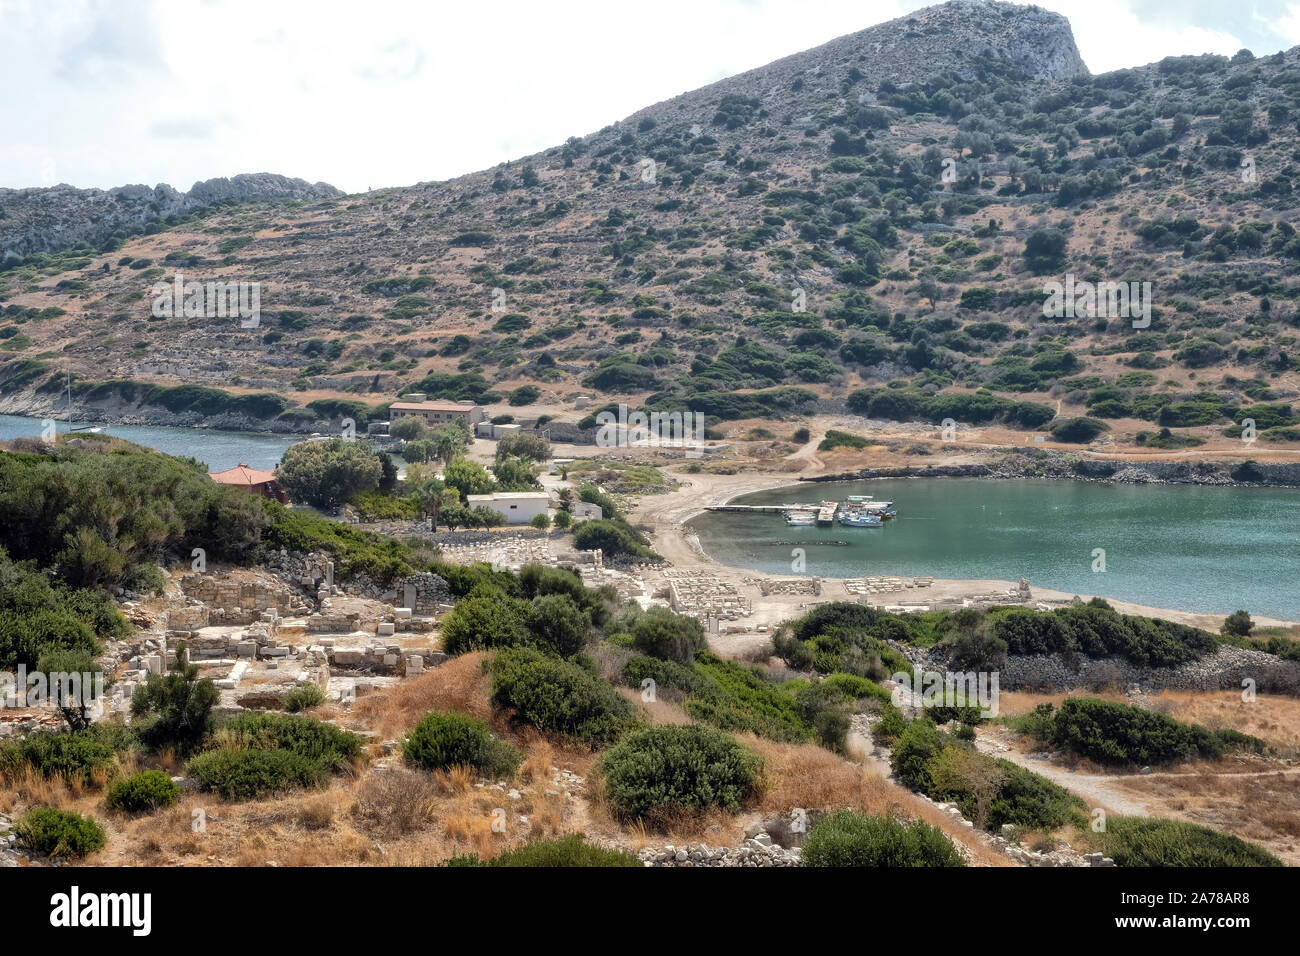 Knidos or Cnidus is one of the major ancient cities in the southwest part of Turkey, located near Datca town, Mugla. Stock Photo